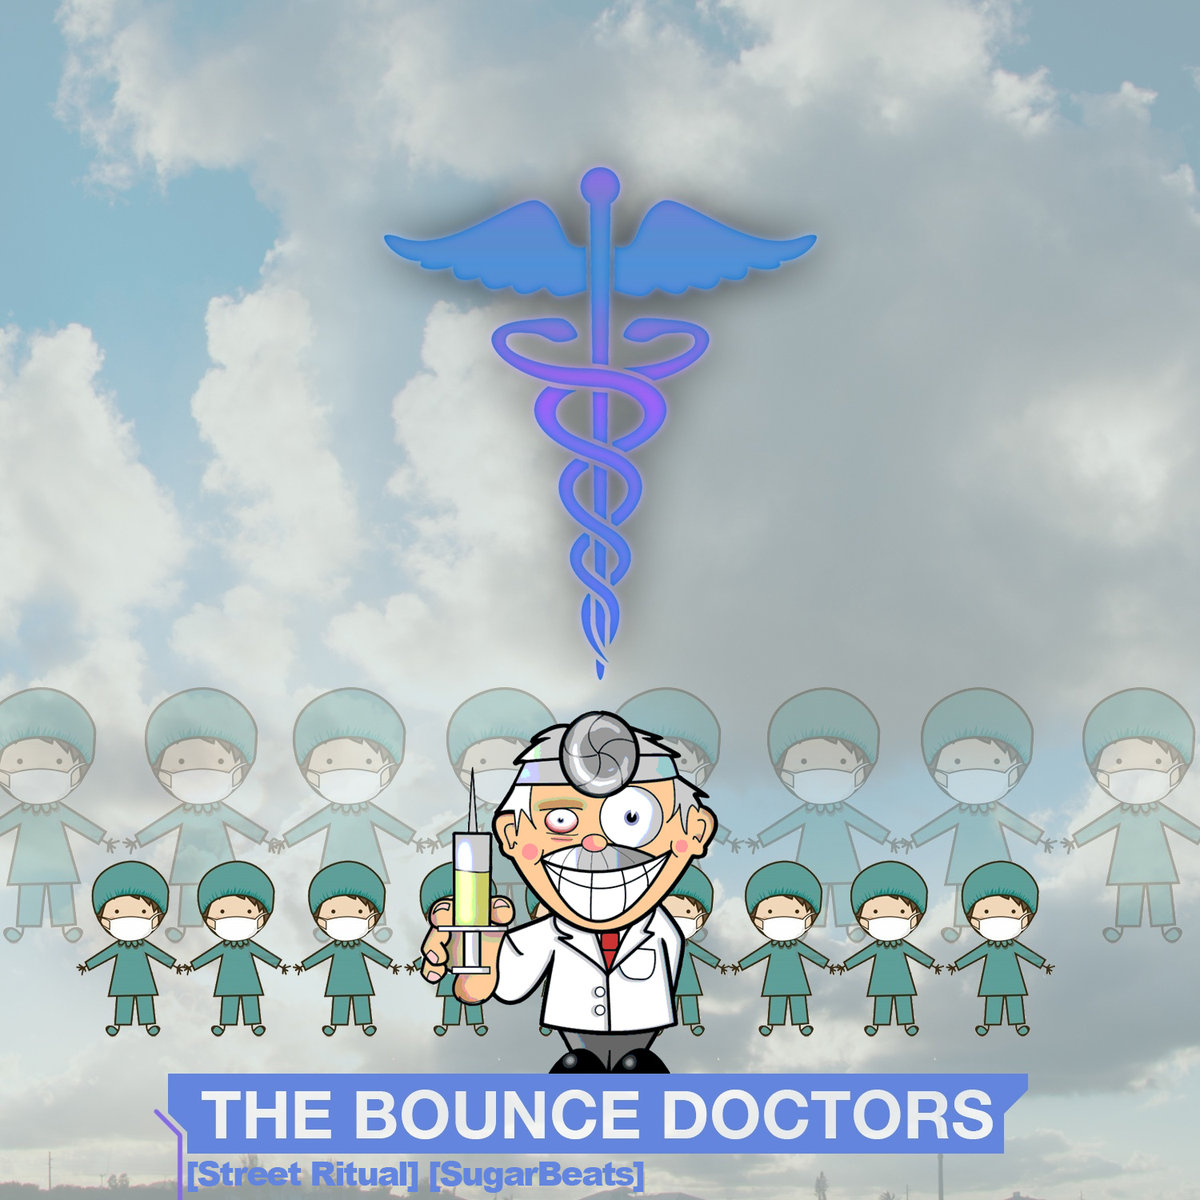 Colin Darling - Spoiled @ 'The Bounce Doctors' album (bass, chillstep)